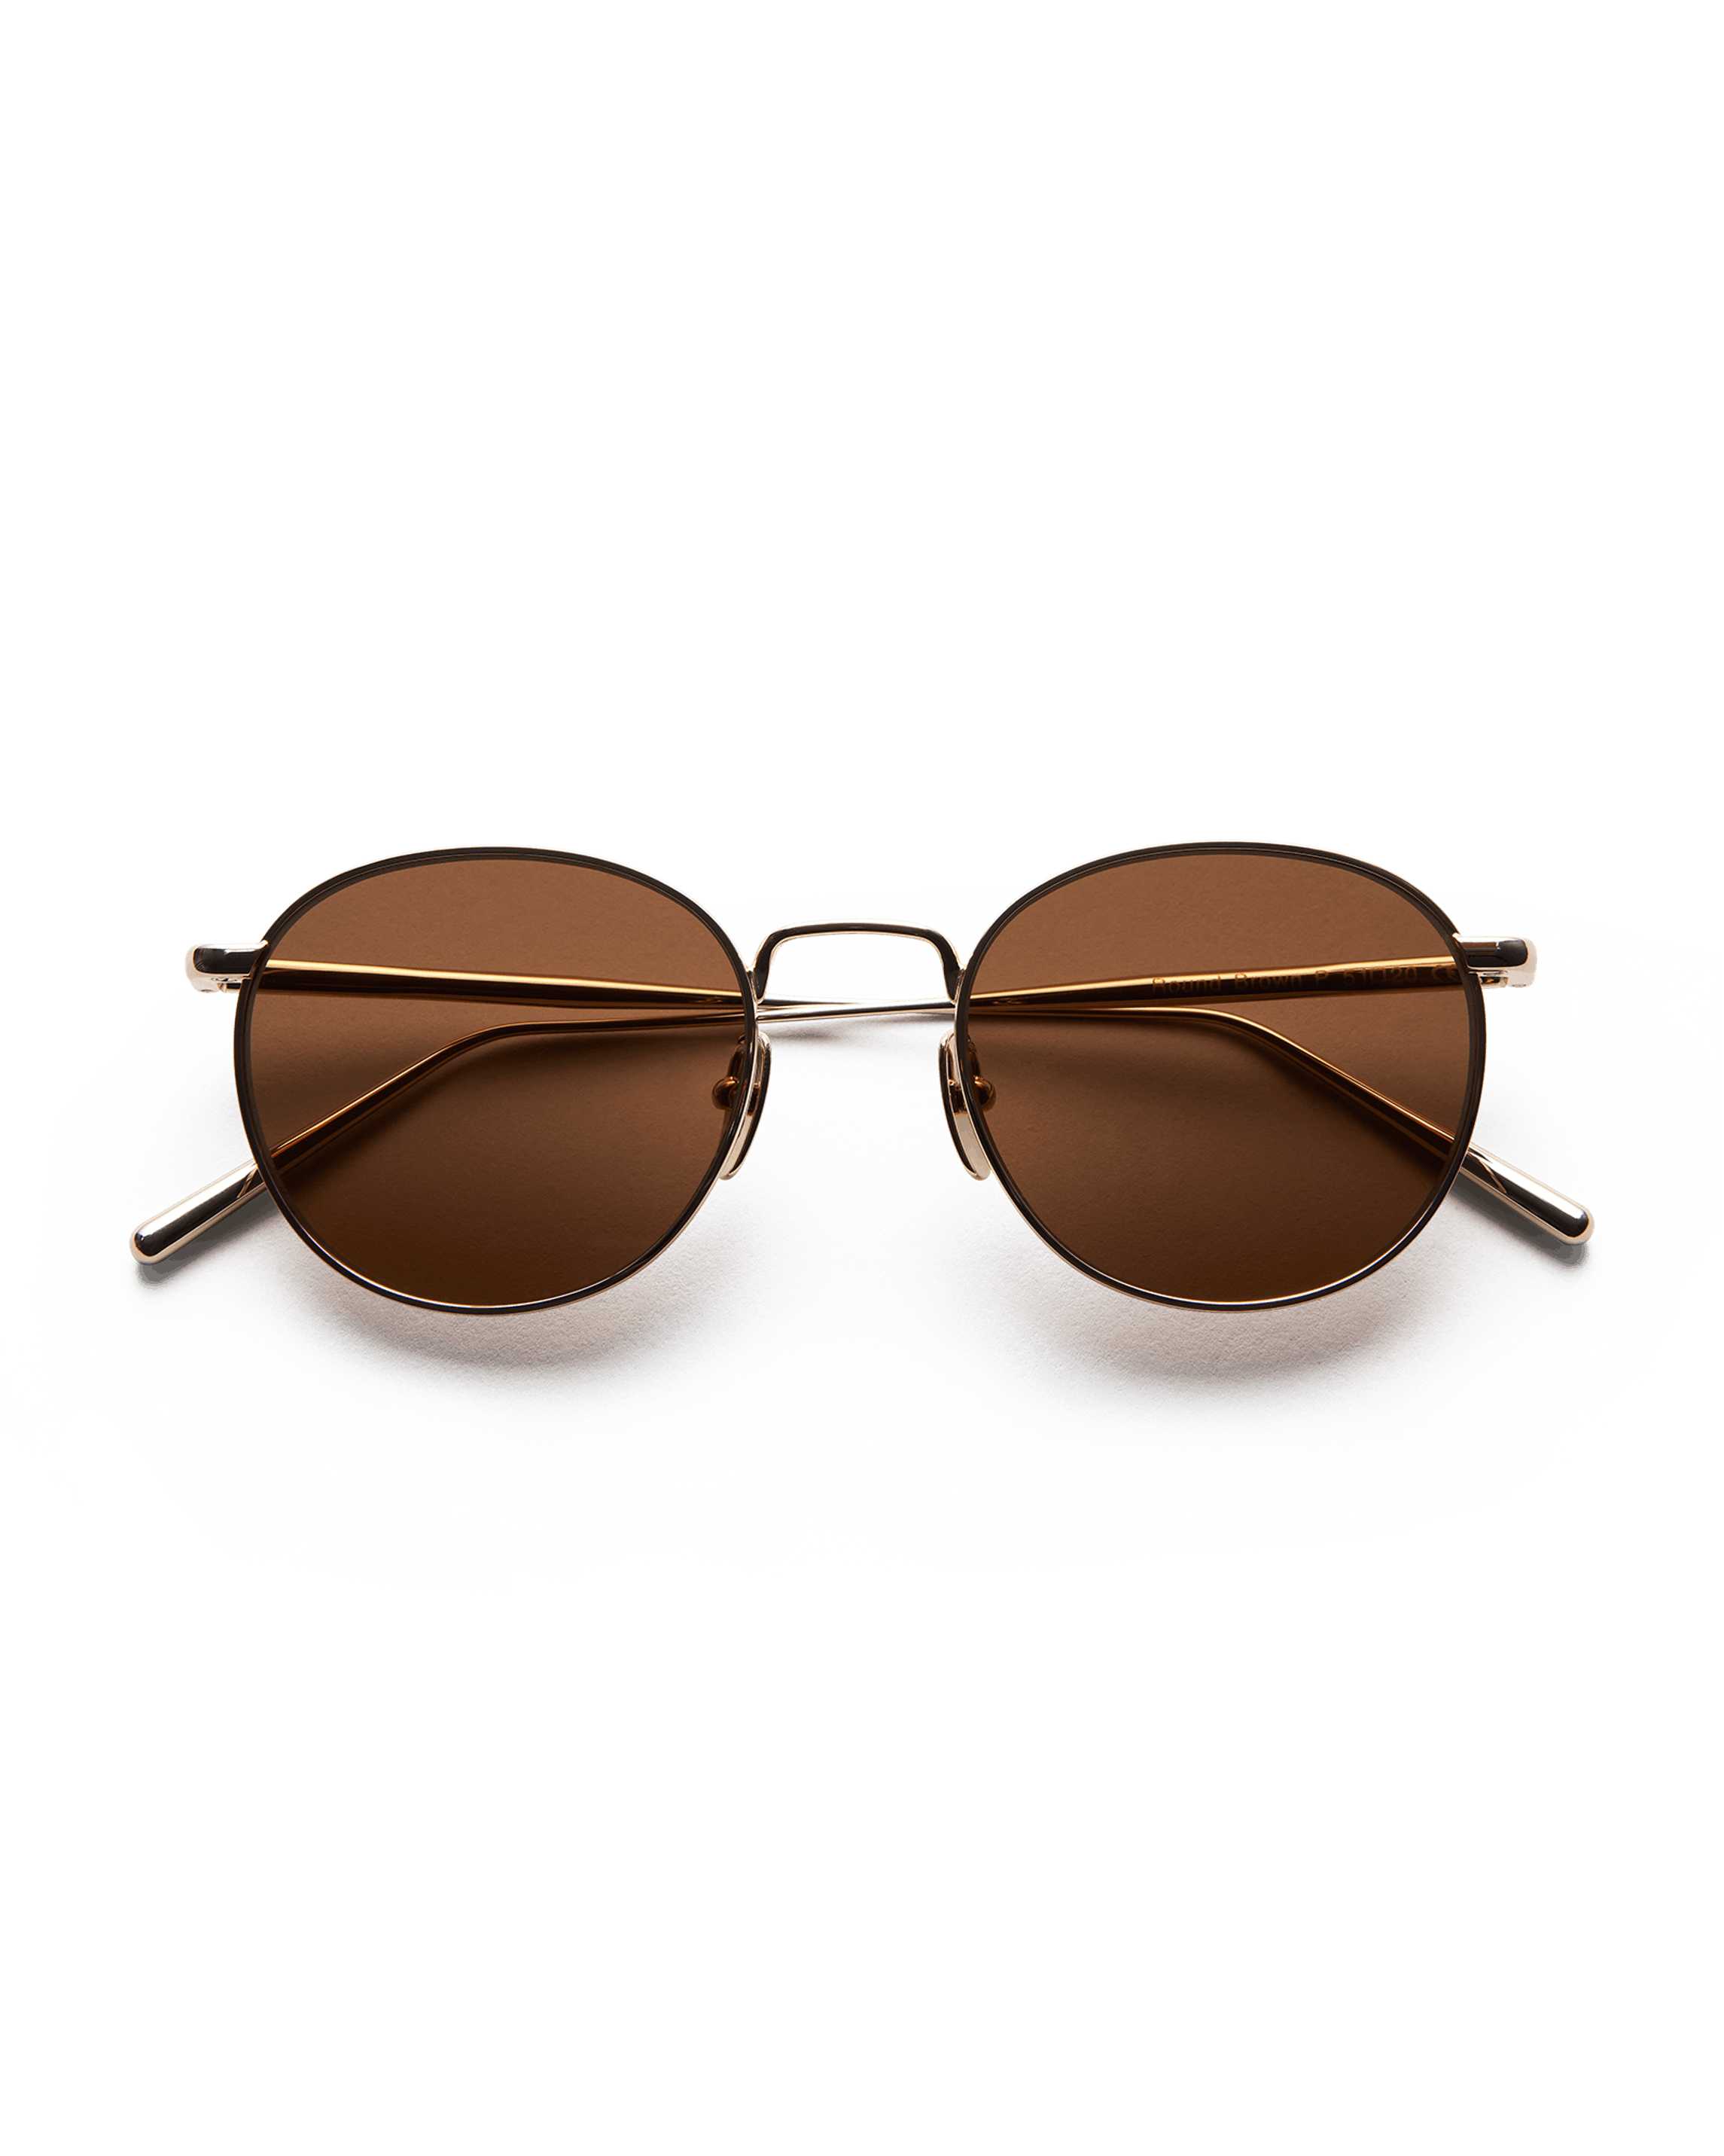 Round gold coloured sunglasses with brown lenses